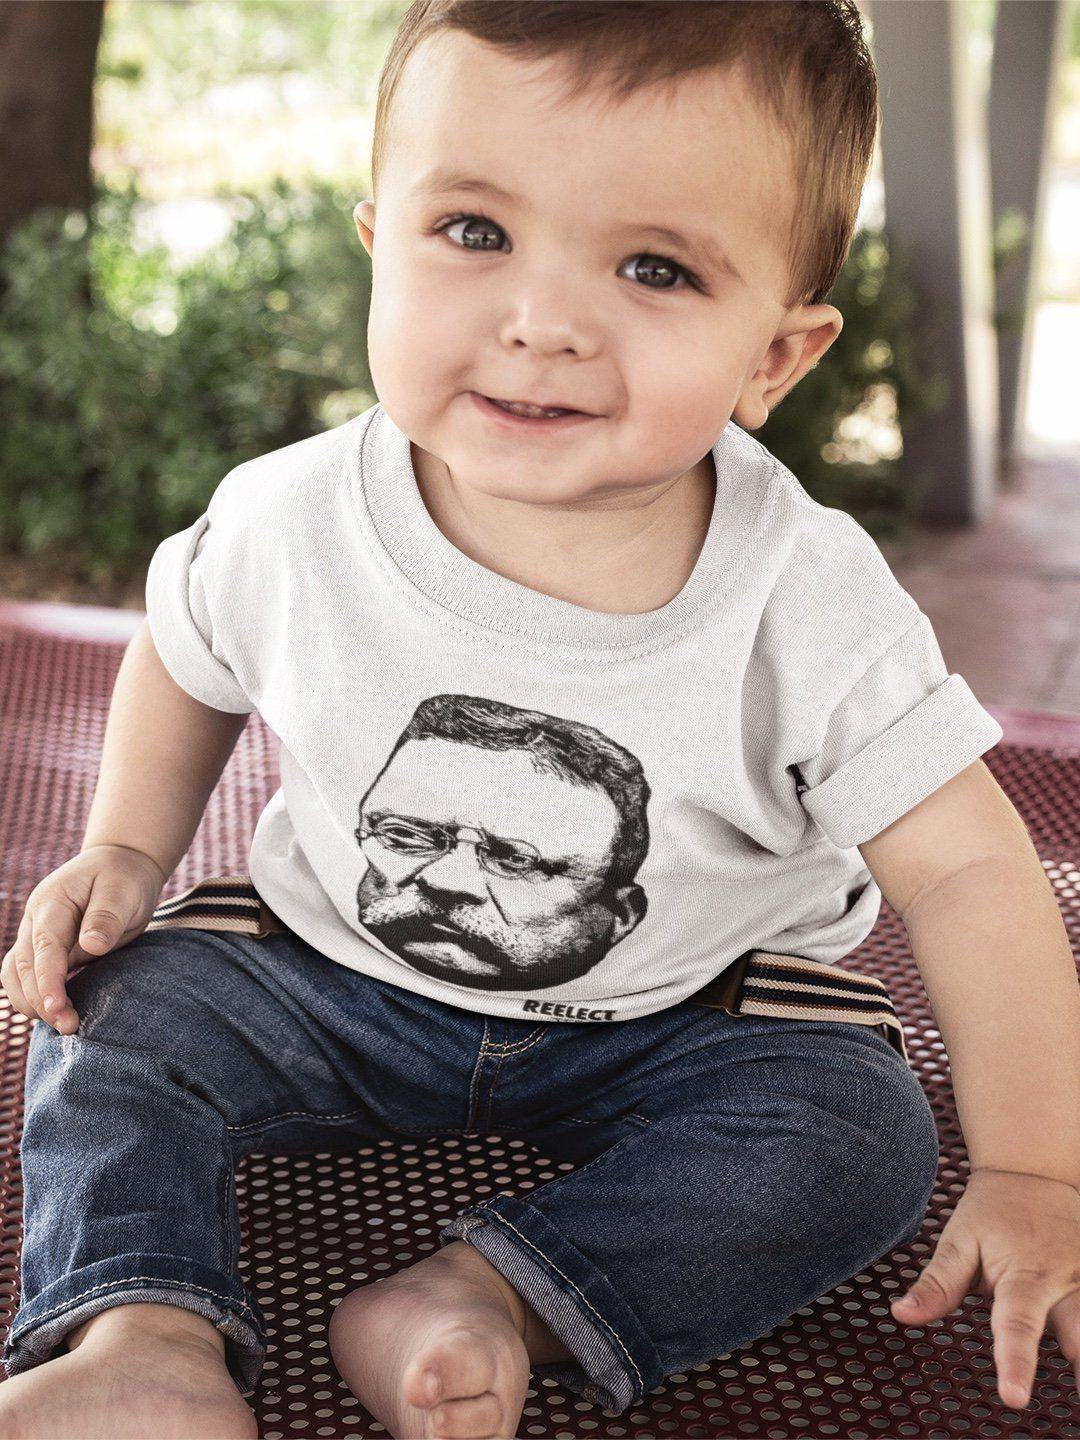 A Square Deal Baby Tee Baby Shirt Reelect Teddy 